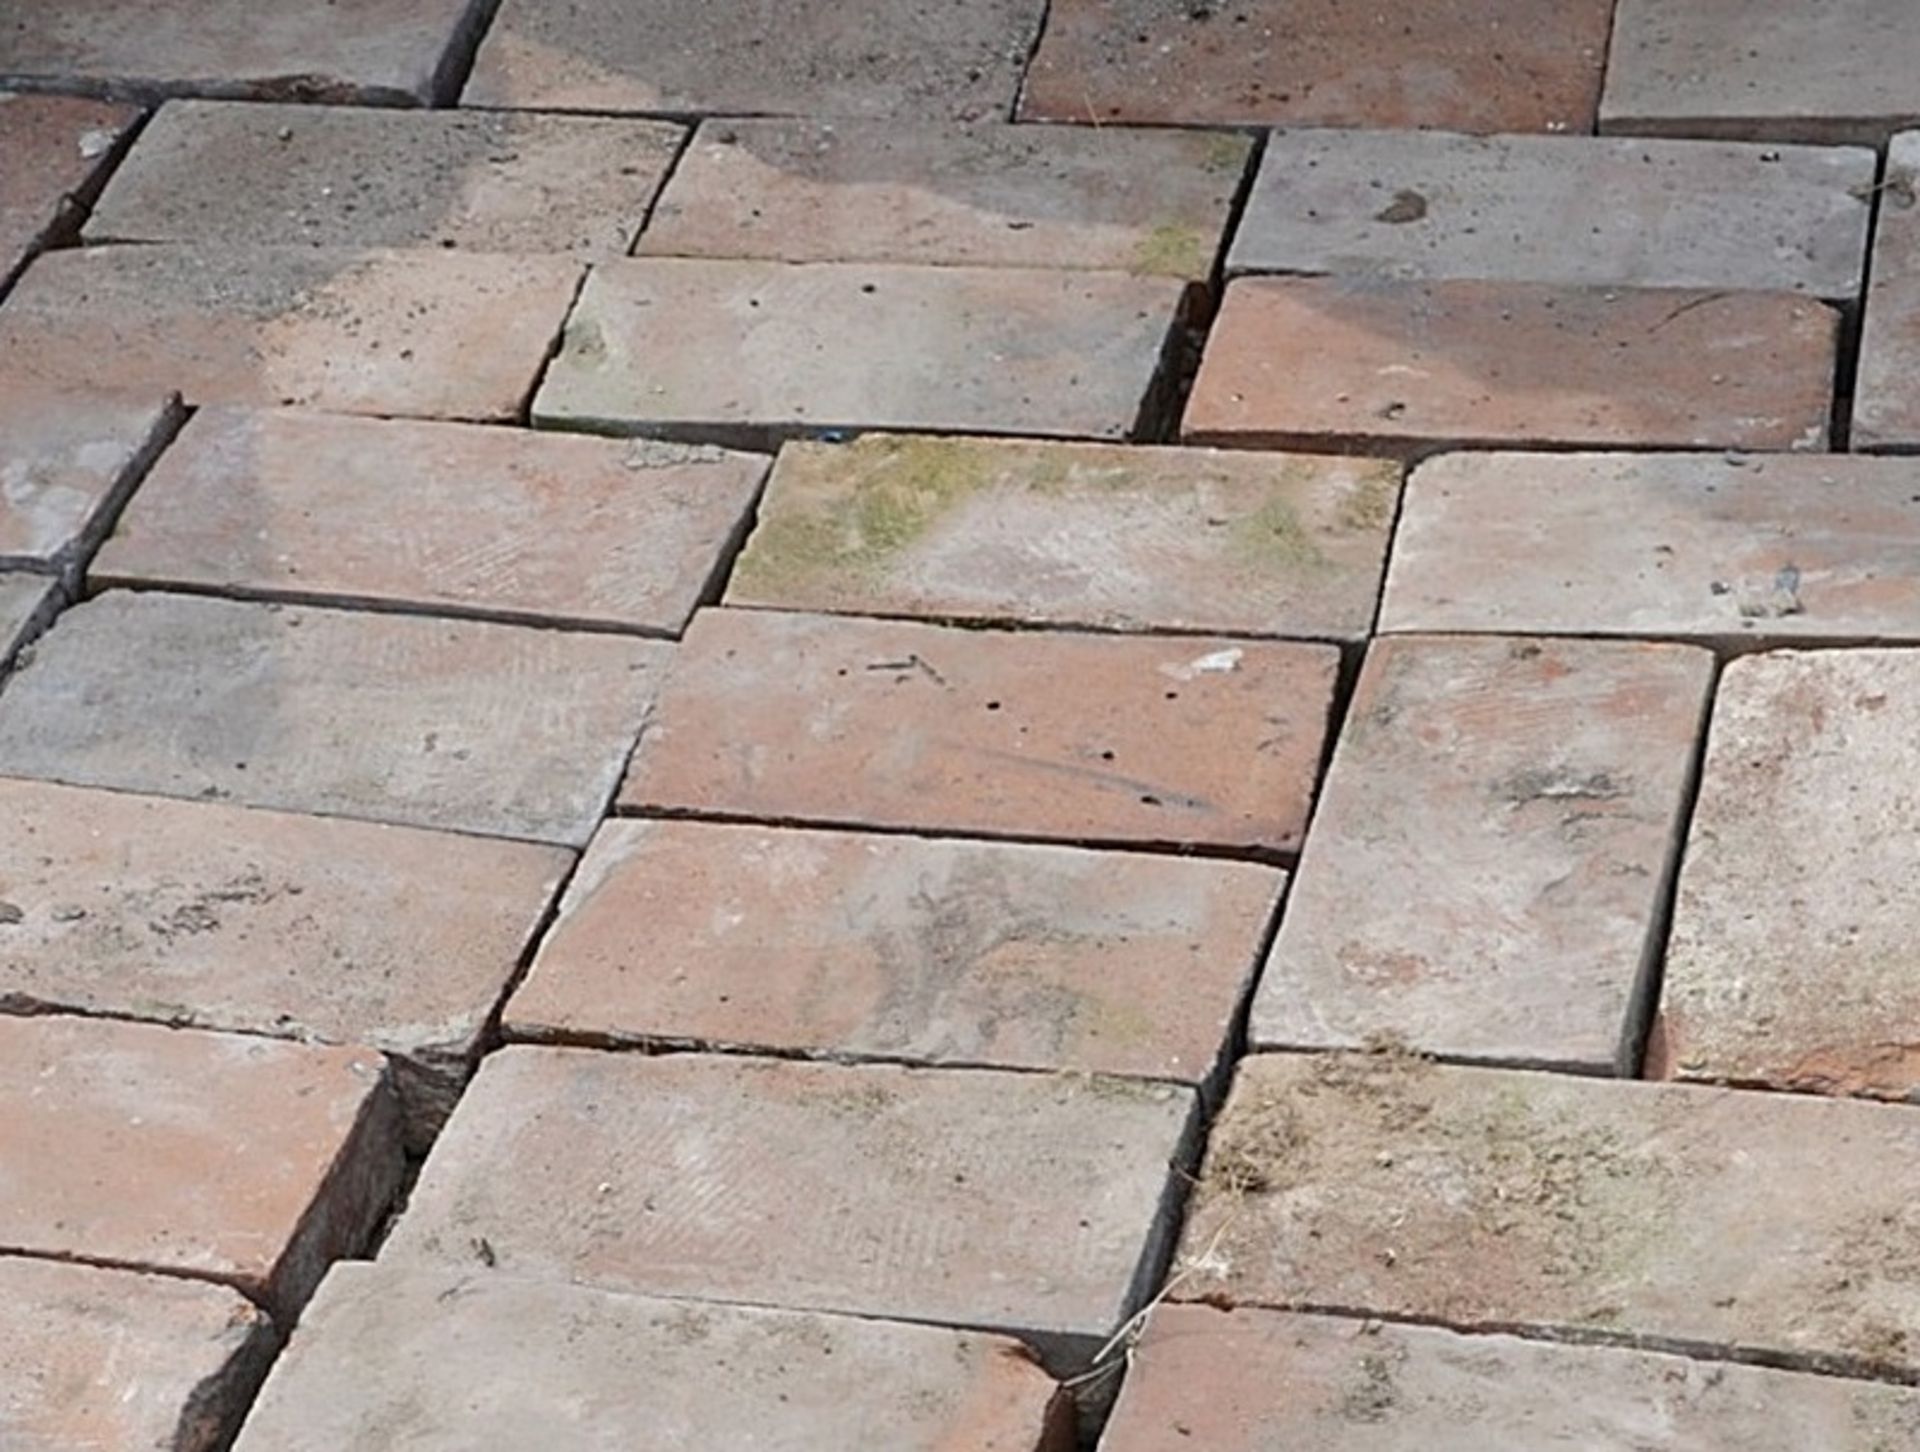 1 x Pallet Of Reclaimed Bricks - Approx 120 In Total - Dimensions: 25 x 12 x 5 - Ref: IT571 - - Image 2 of 3